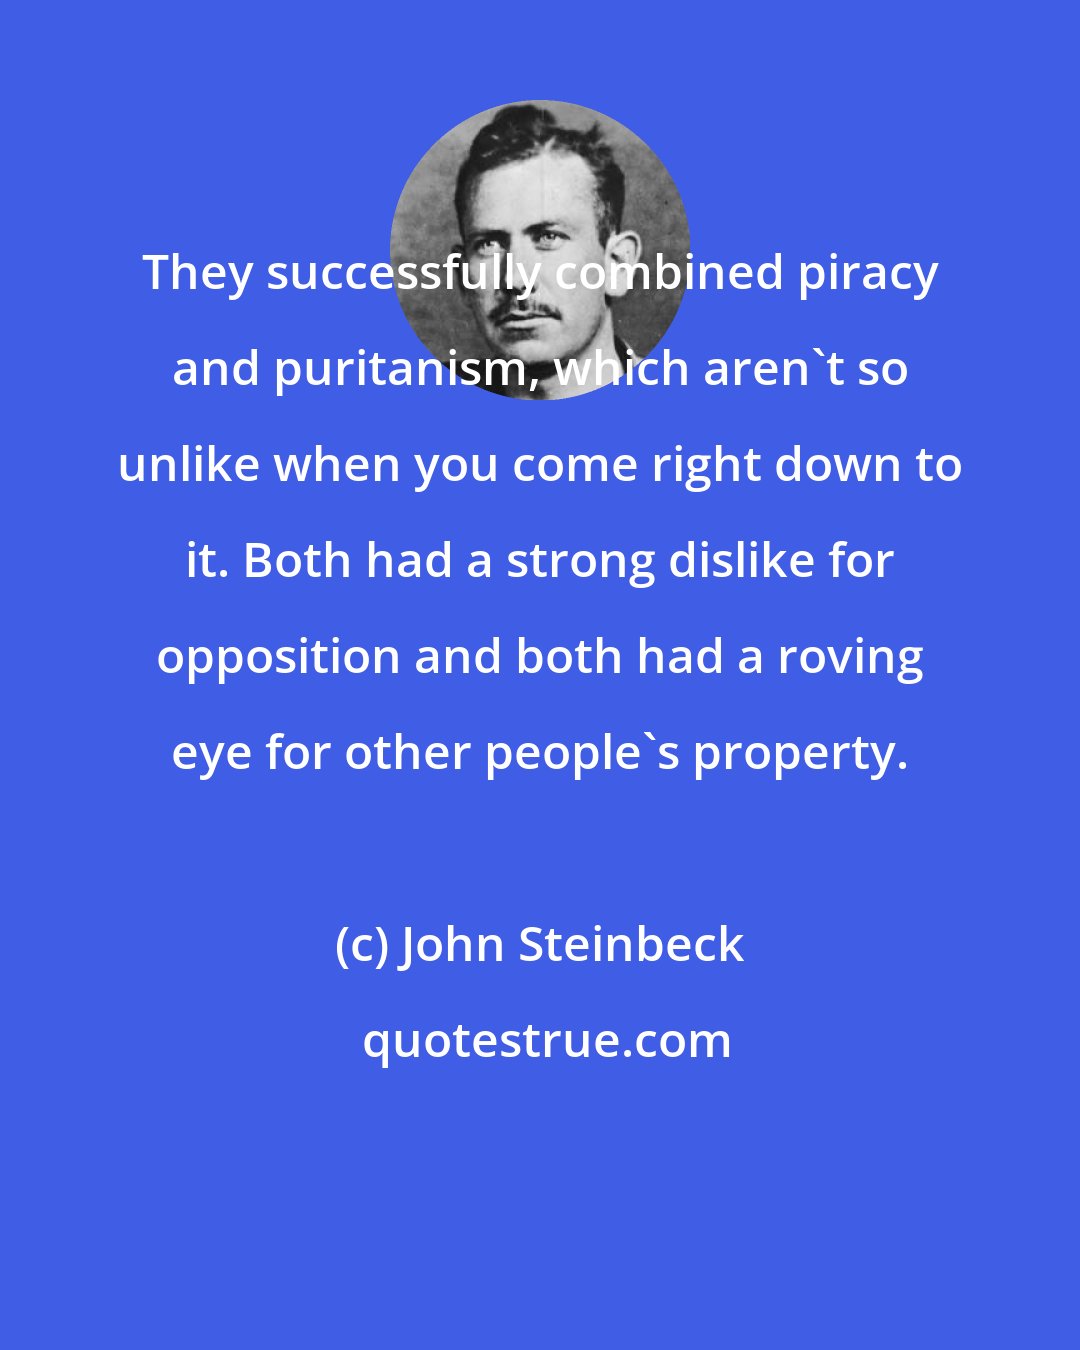 John Steinbeck: They successfully combined piracy and puritanism, which aren't so unlike when you come right down to it. Both had a strong dislike for opposition and both had a roving eye for other people's property.